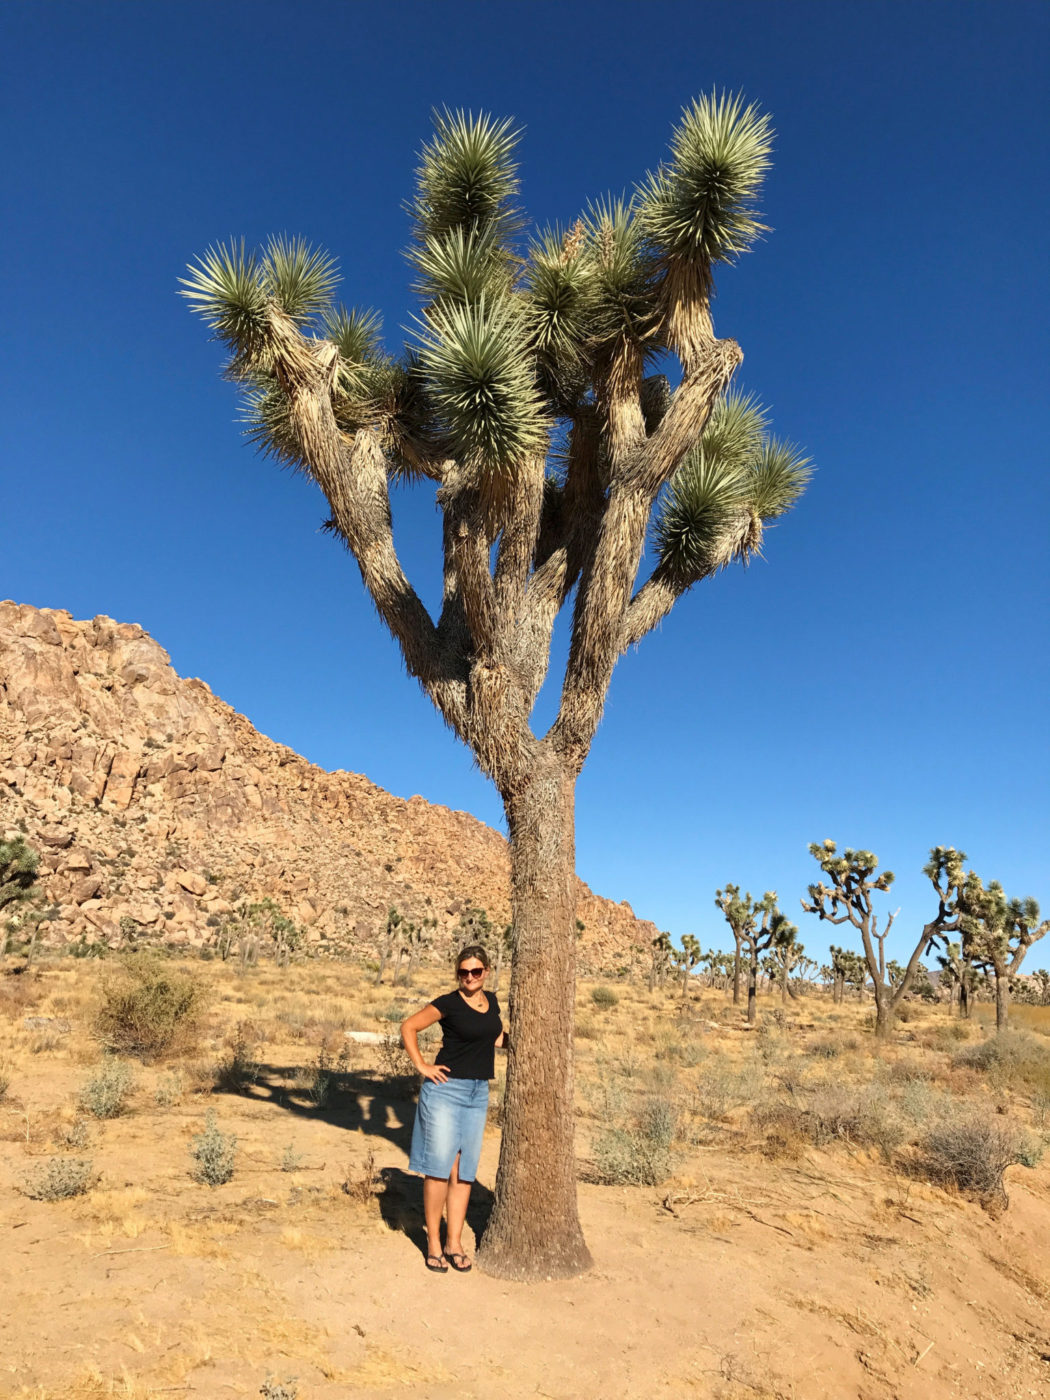 Here I am next to a Joshua Tree. This one is quite tall!